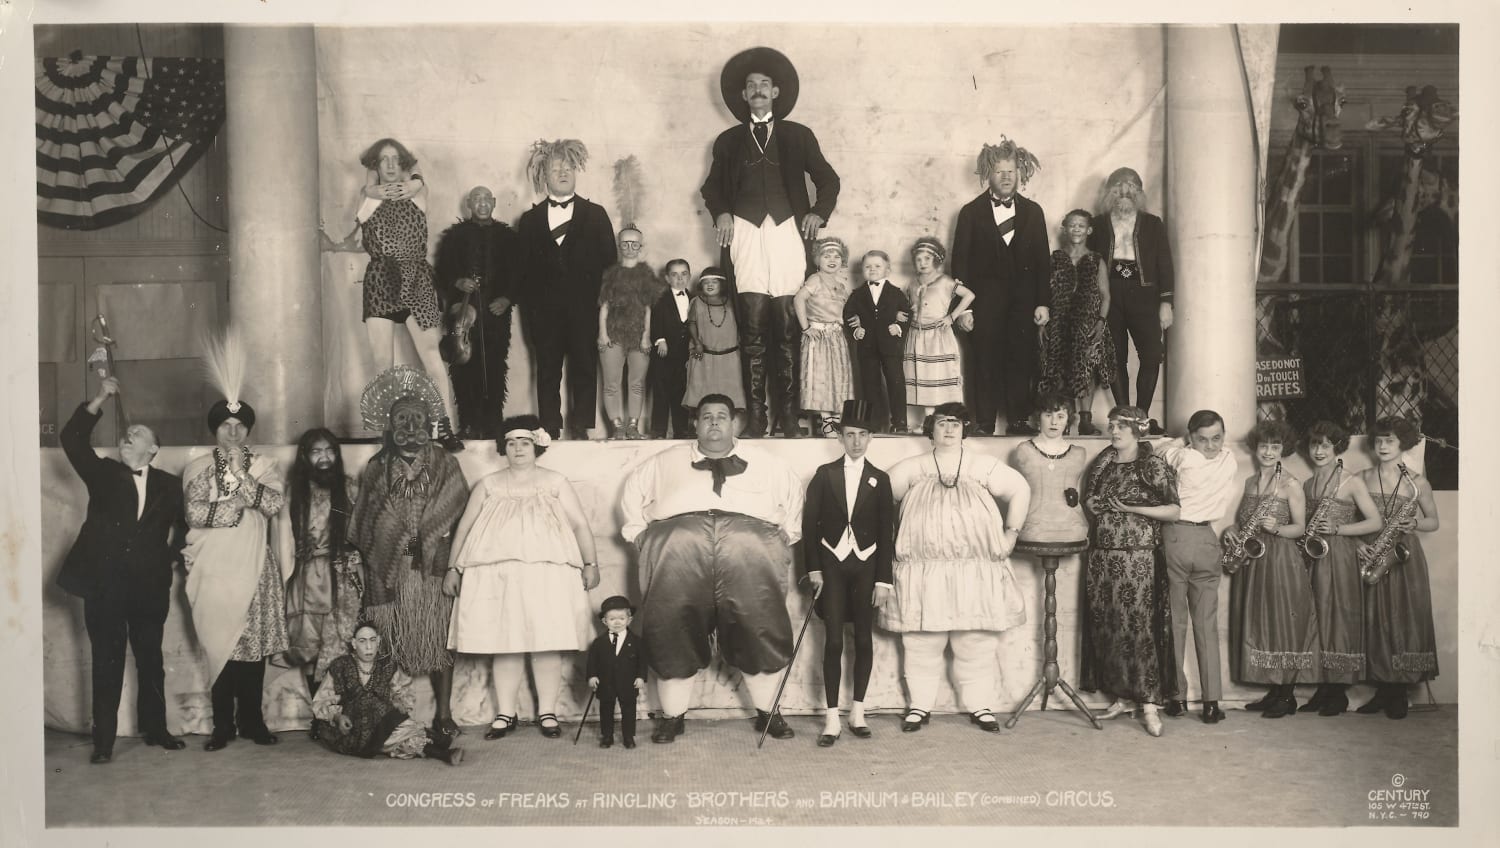 P.T. Barnum & Bailey's combined circus performers, New York 1924